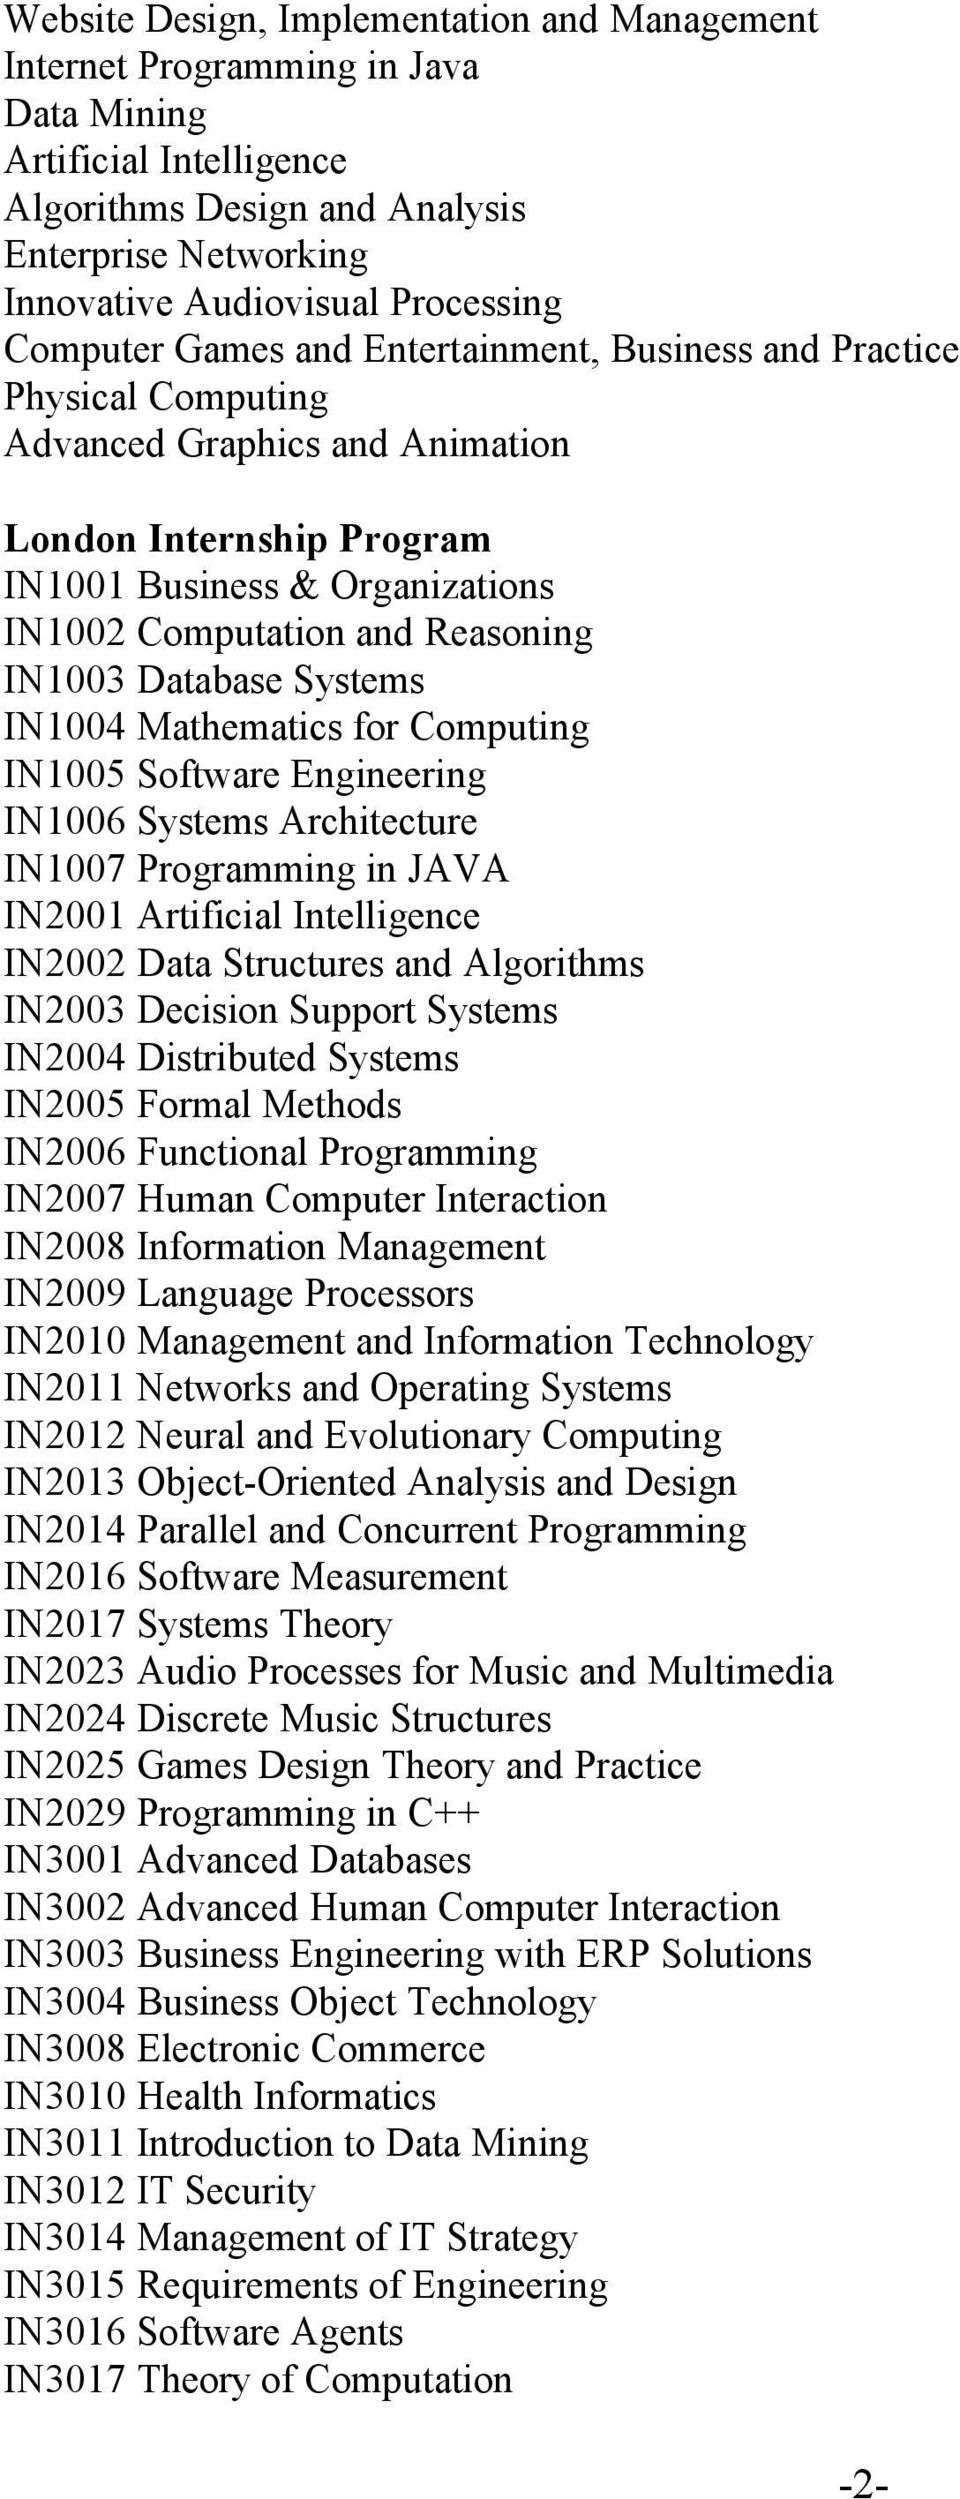 IN1003 Database Systems IN1004 Mathematics for Computing IN1005 Software Engineering IN1006 Systems Architecture IN1007 Programming in JAVA IN2001 Artificial Intelligence IN2002 Data Structures and